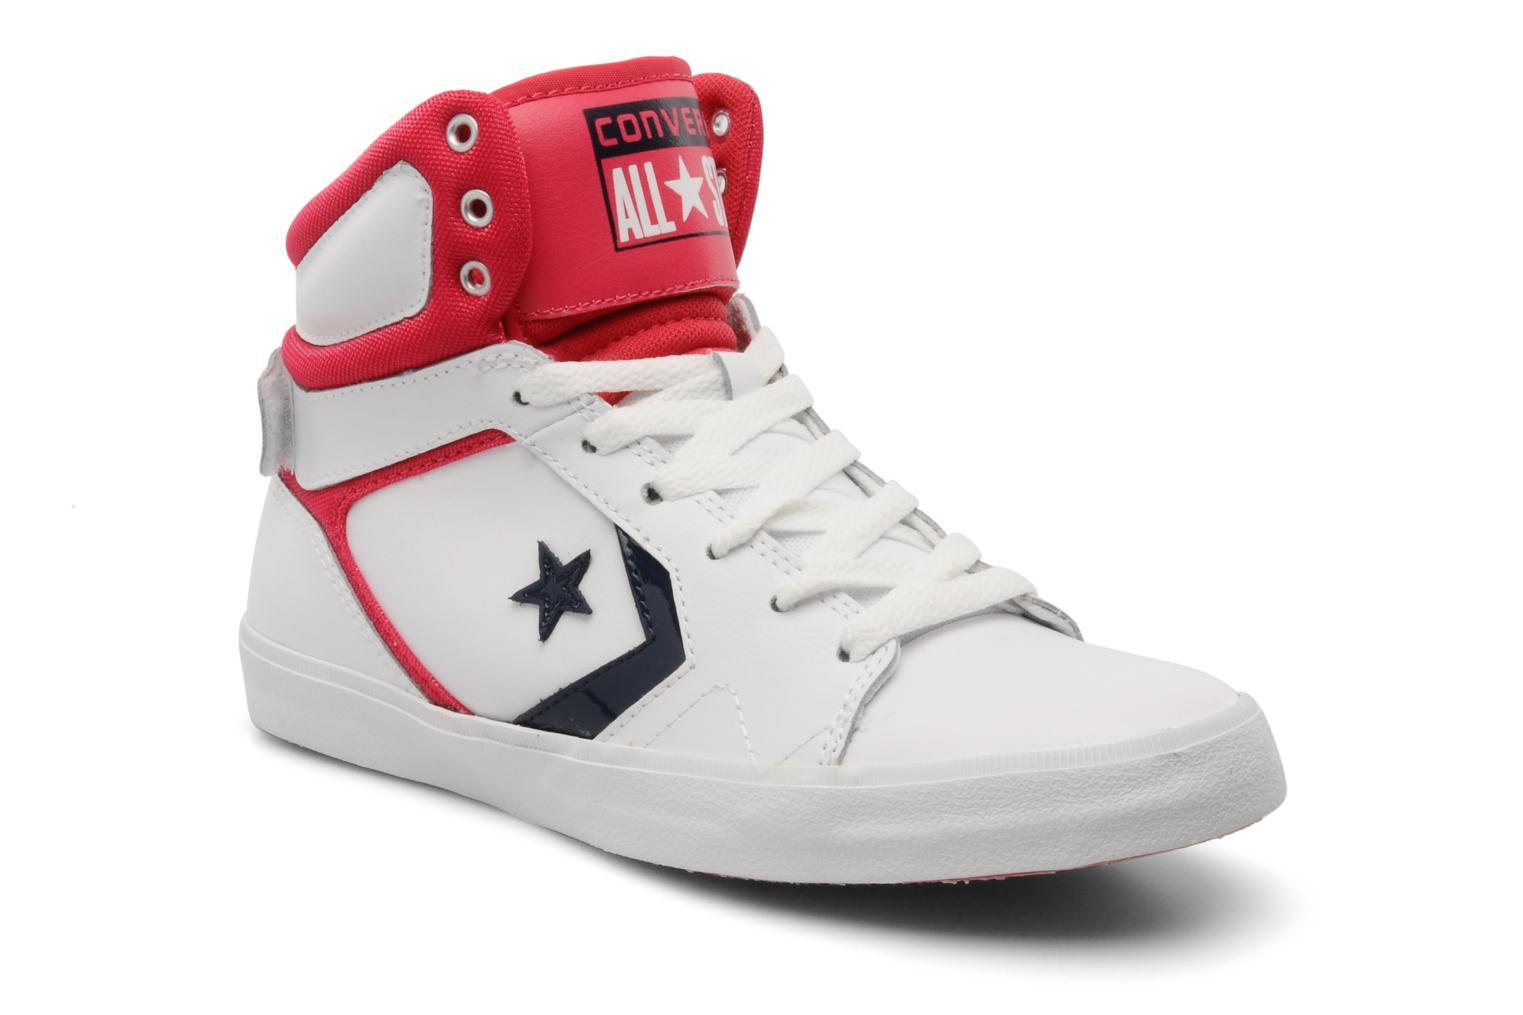 Foto Tenis moda Converse All Star 12 Leather Mid W Mujer